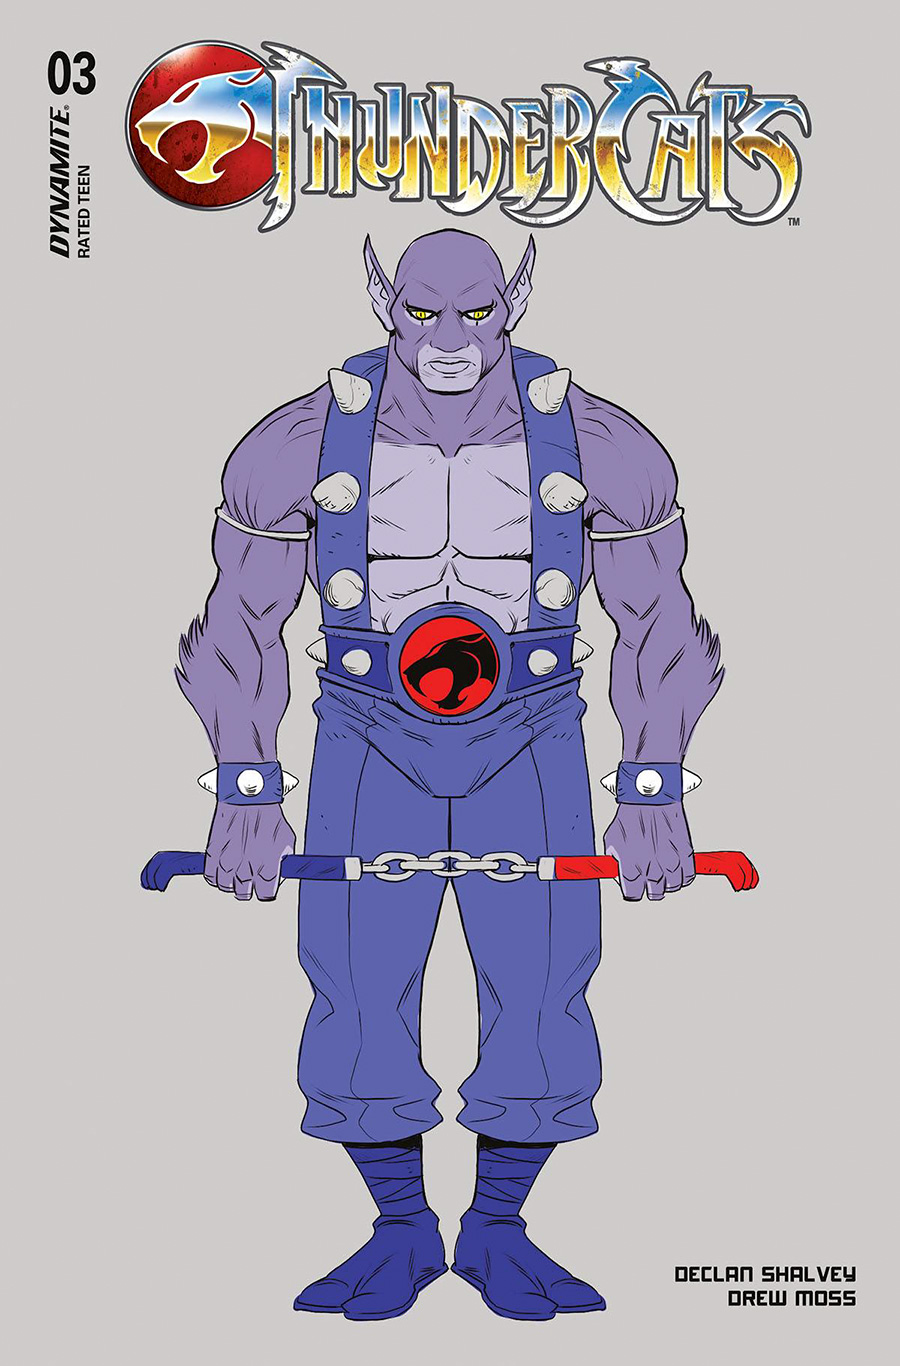 Thundercats Vol 3 #3 Cover K Incentive Drew Moss Panthro Character Design Variant Cover